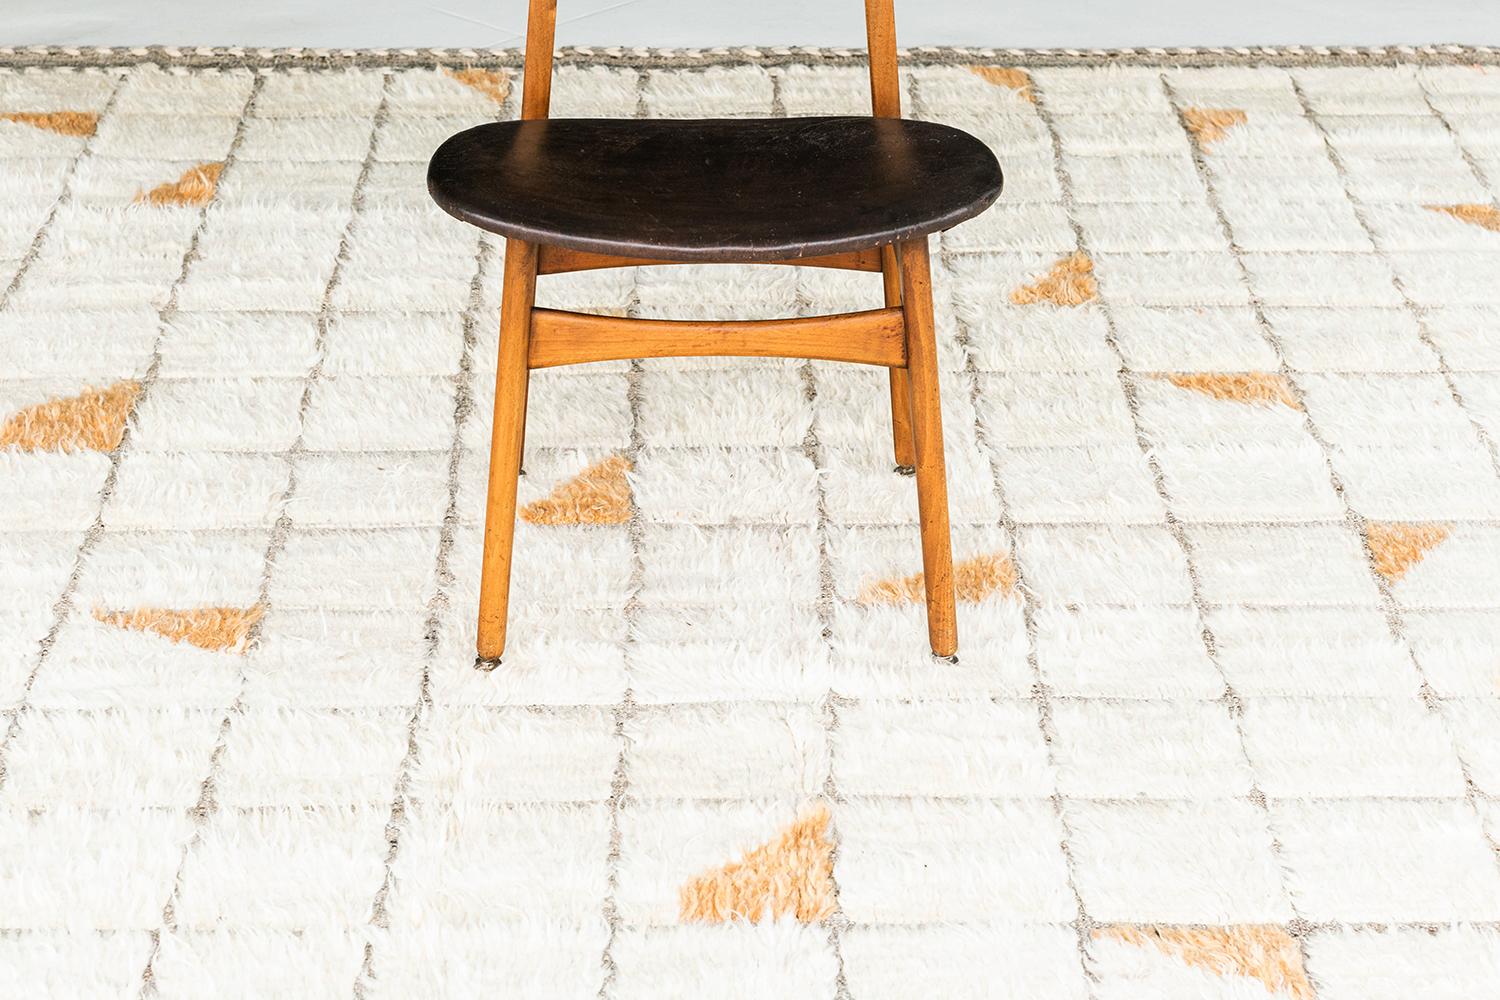 Nina' is an eclectic and modern day interpretation of the Moroccan World. It's all-over grid design, sporadic saffron yellow shapes, and unique play of textures create an exciting and one of a kind essence. This collection, 'Kust' also meaning